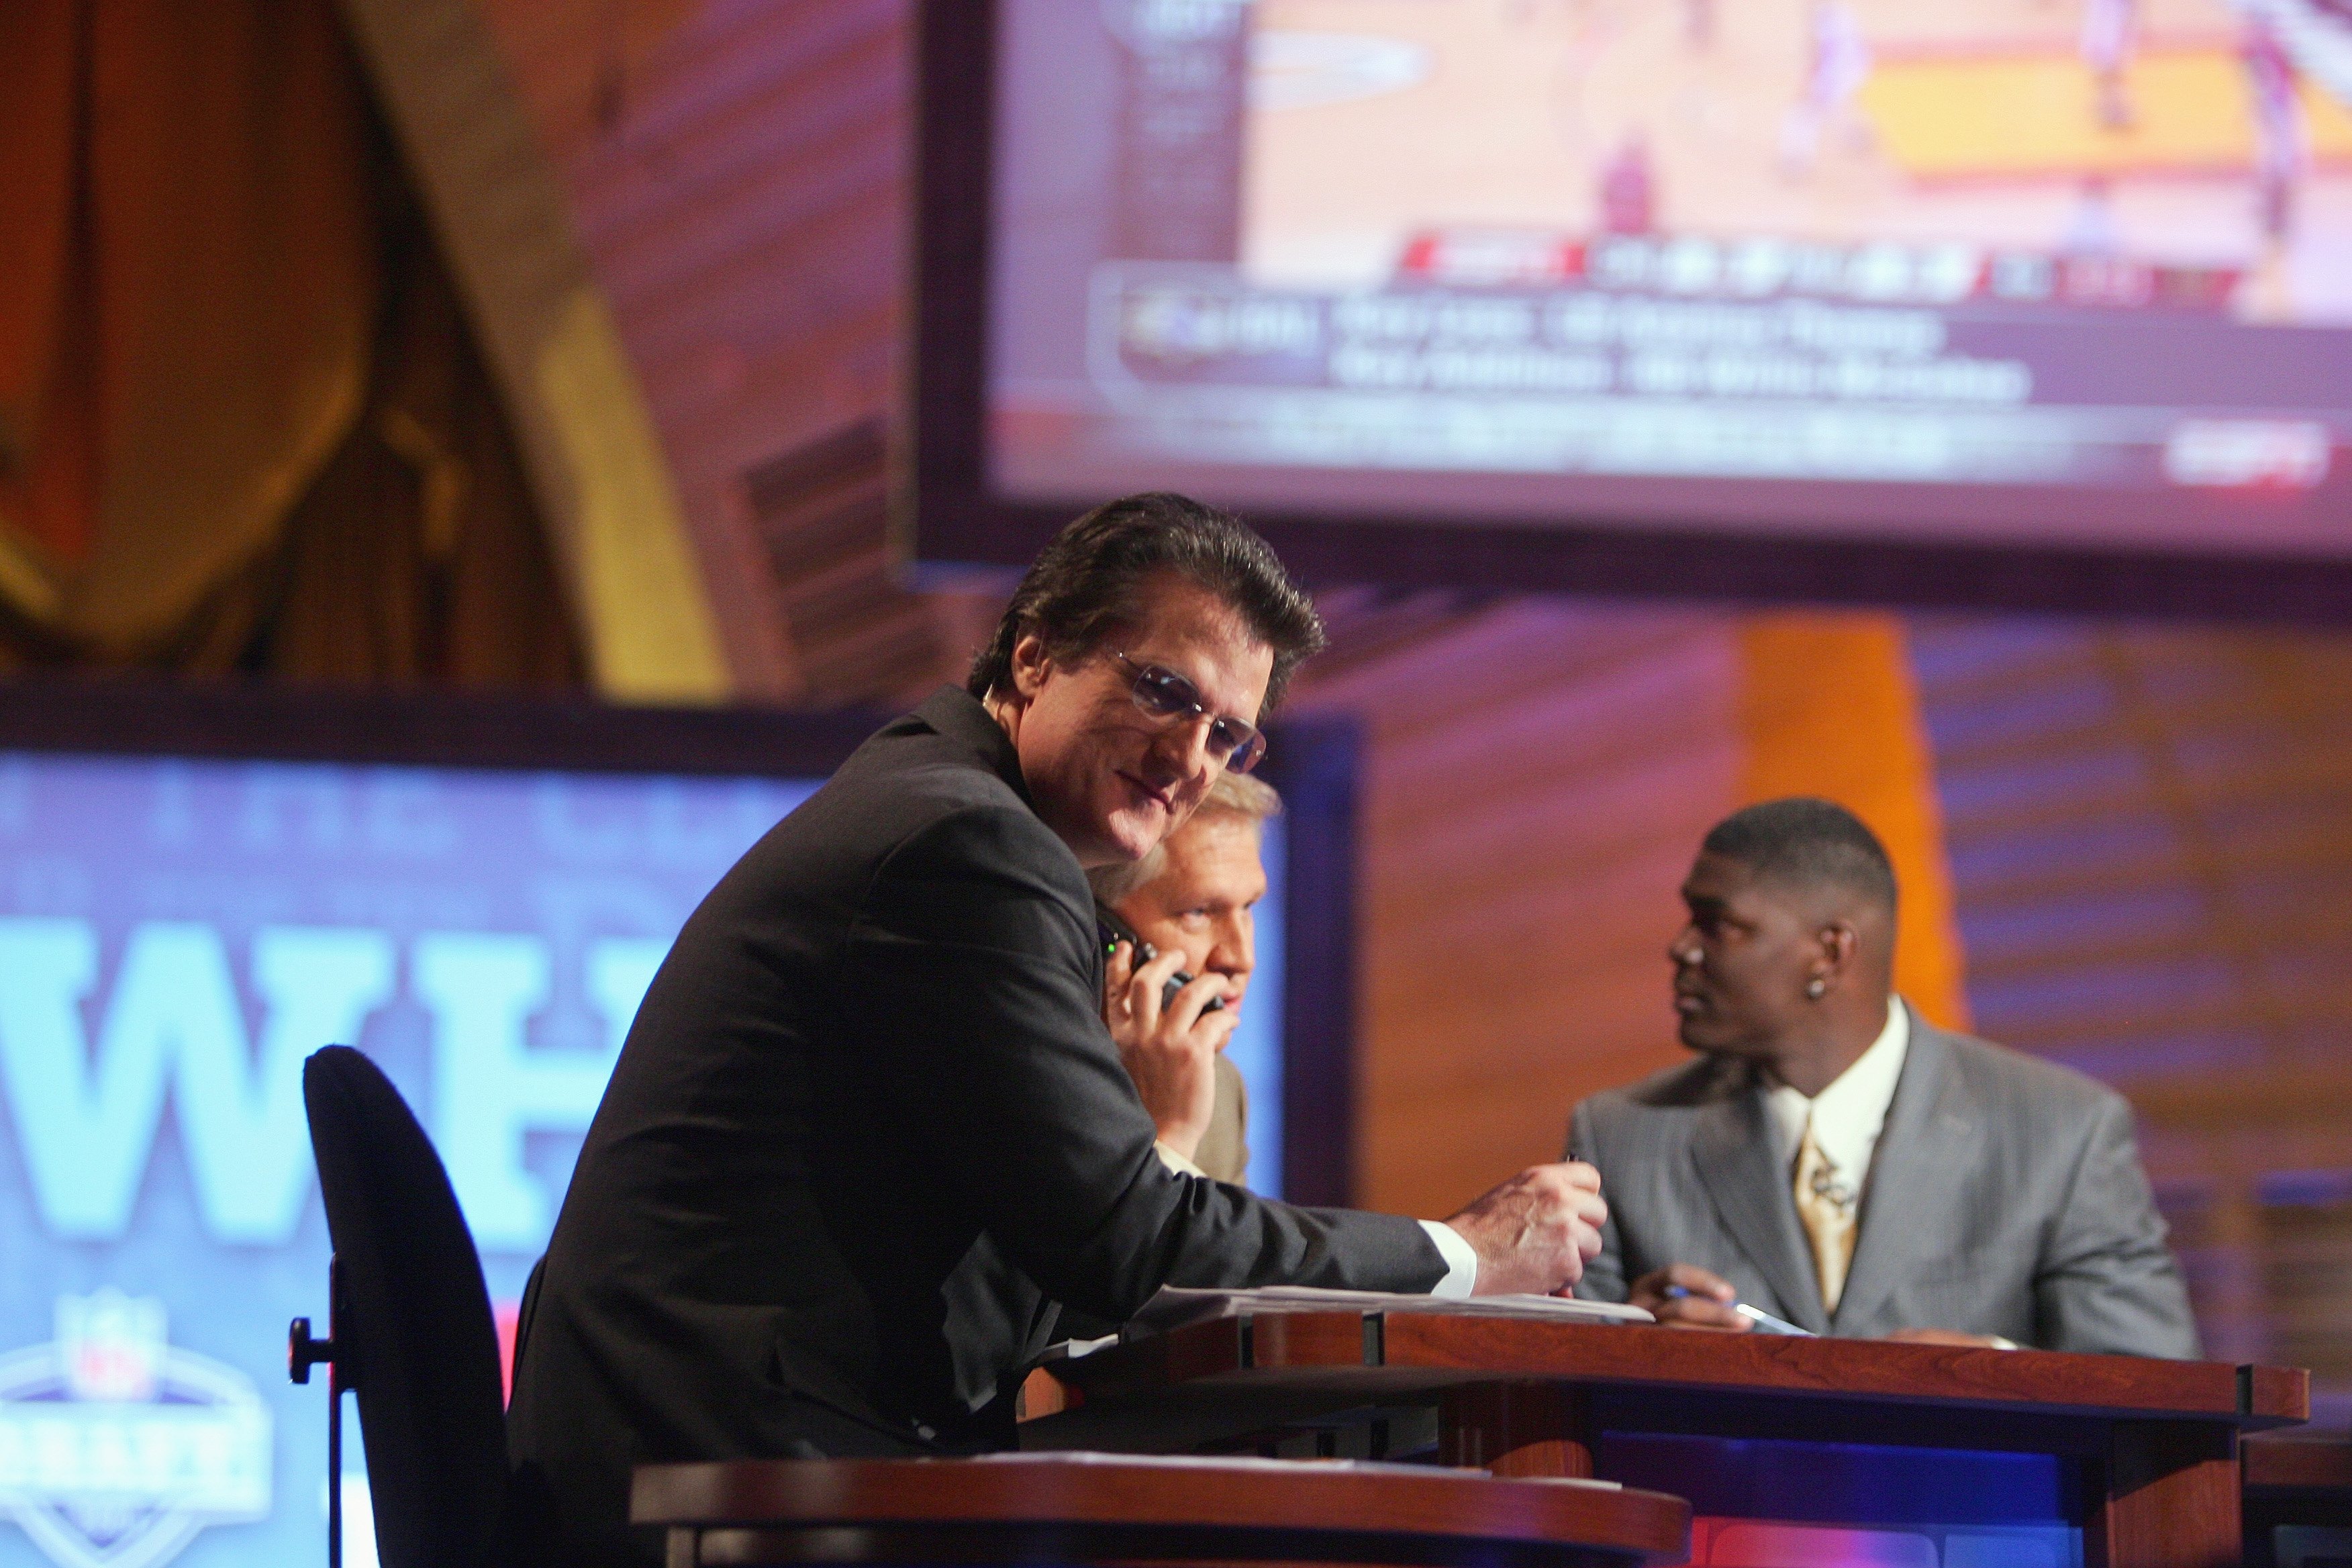 NEW YORK - APRIL 28:  Mel Kiper, Chris Mortensen and Keyshawn Johnson broadcast for ESPN during the 2007 NFL Draft on April 28, 2007 at Radio City Music Hall in New York, New York. (Photo by Chris McGrath/Getty Images)